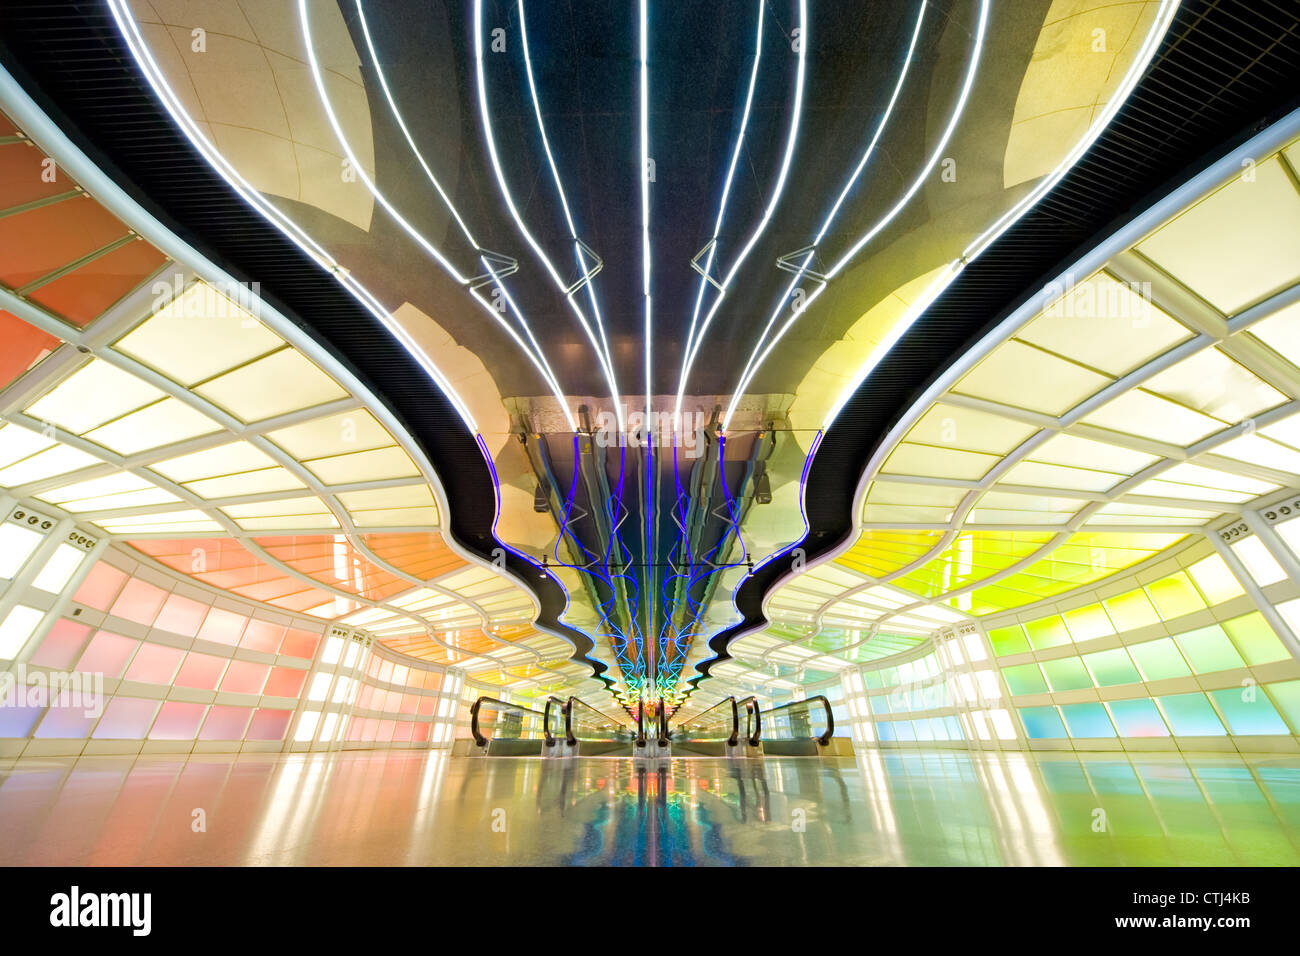 Chicago O'Hare International Airport. Tunnel between Concourses B and C of United Terminal with moving neon lights. Stock Photo